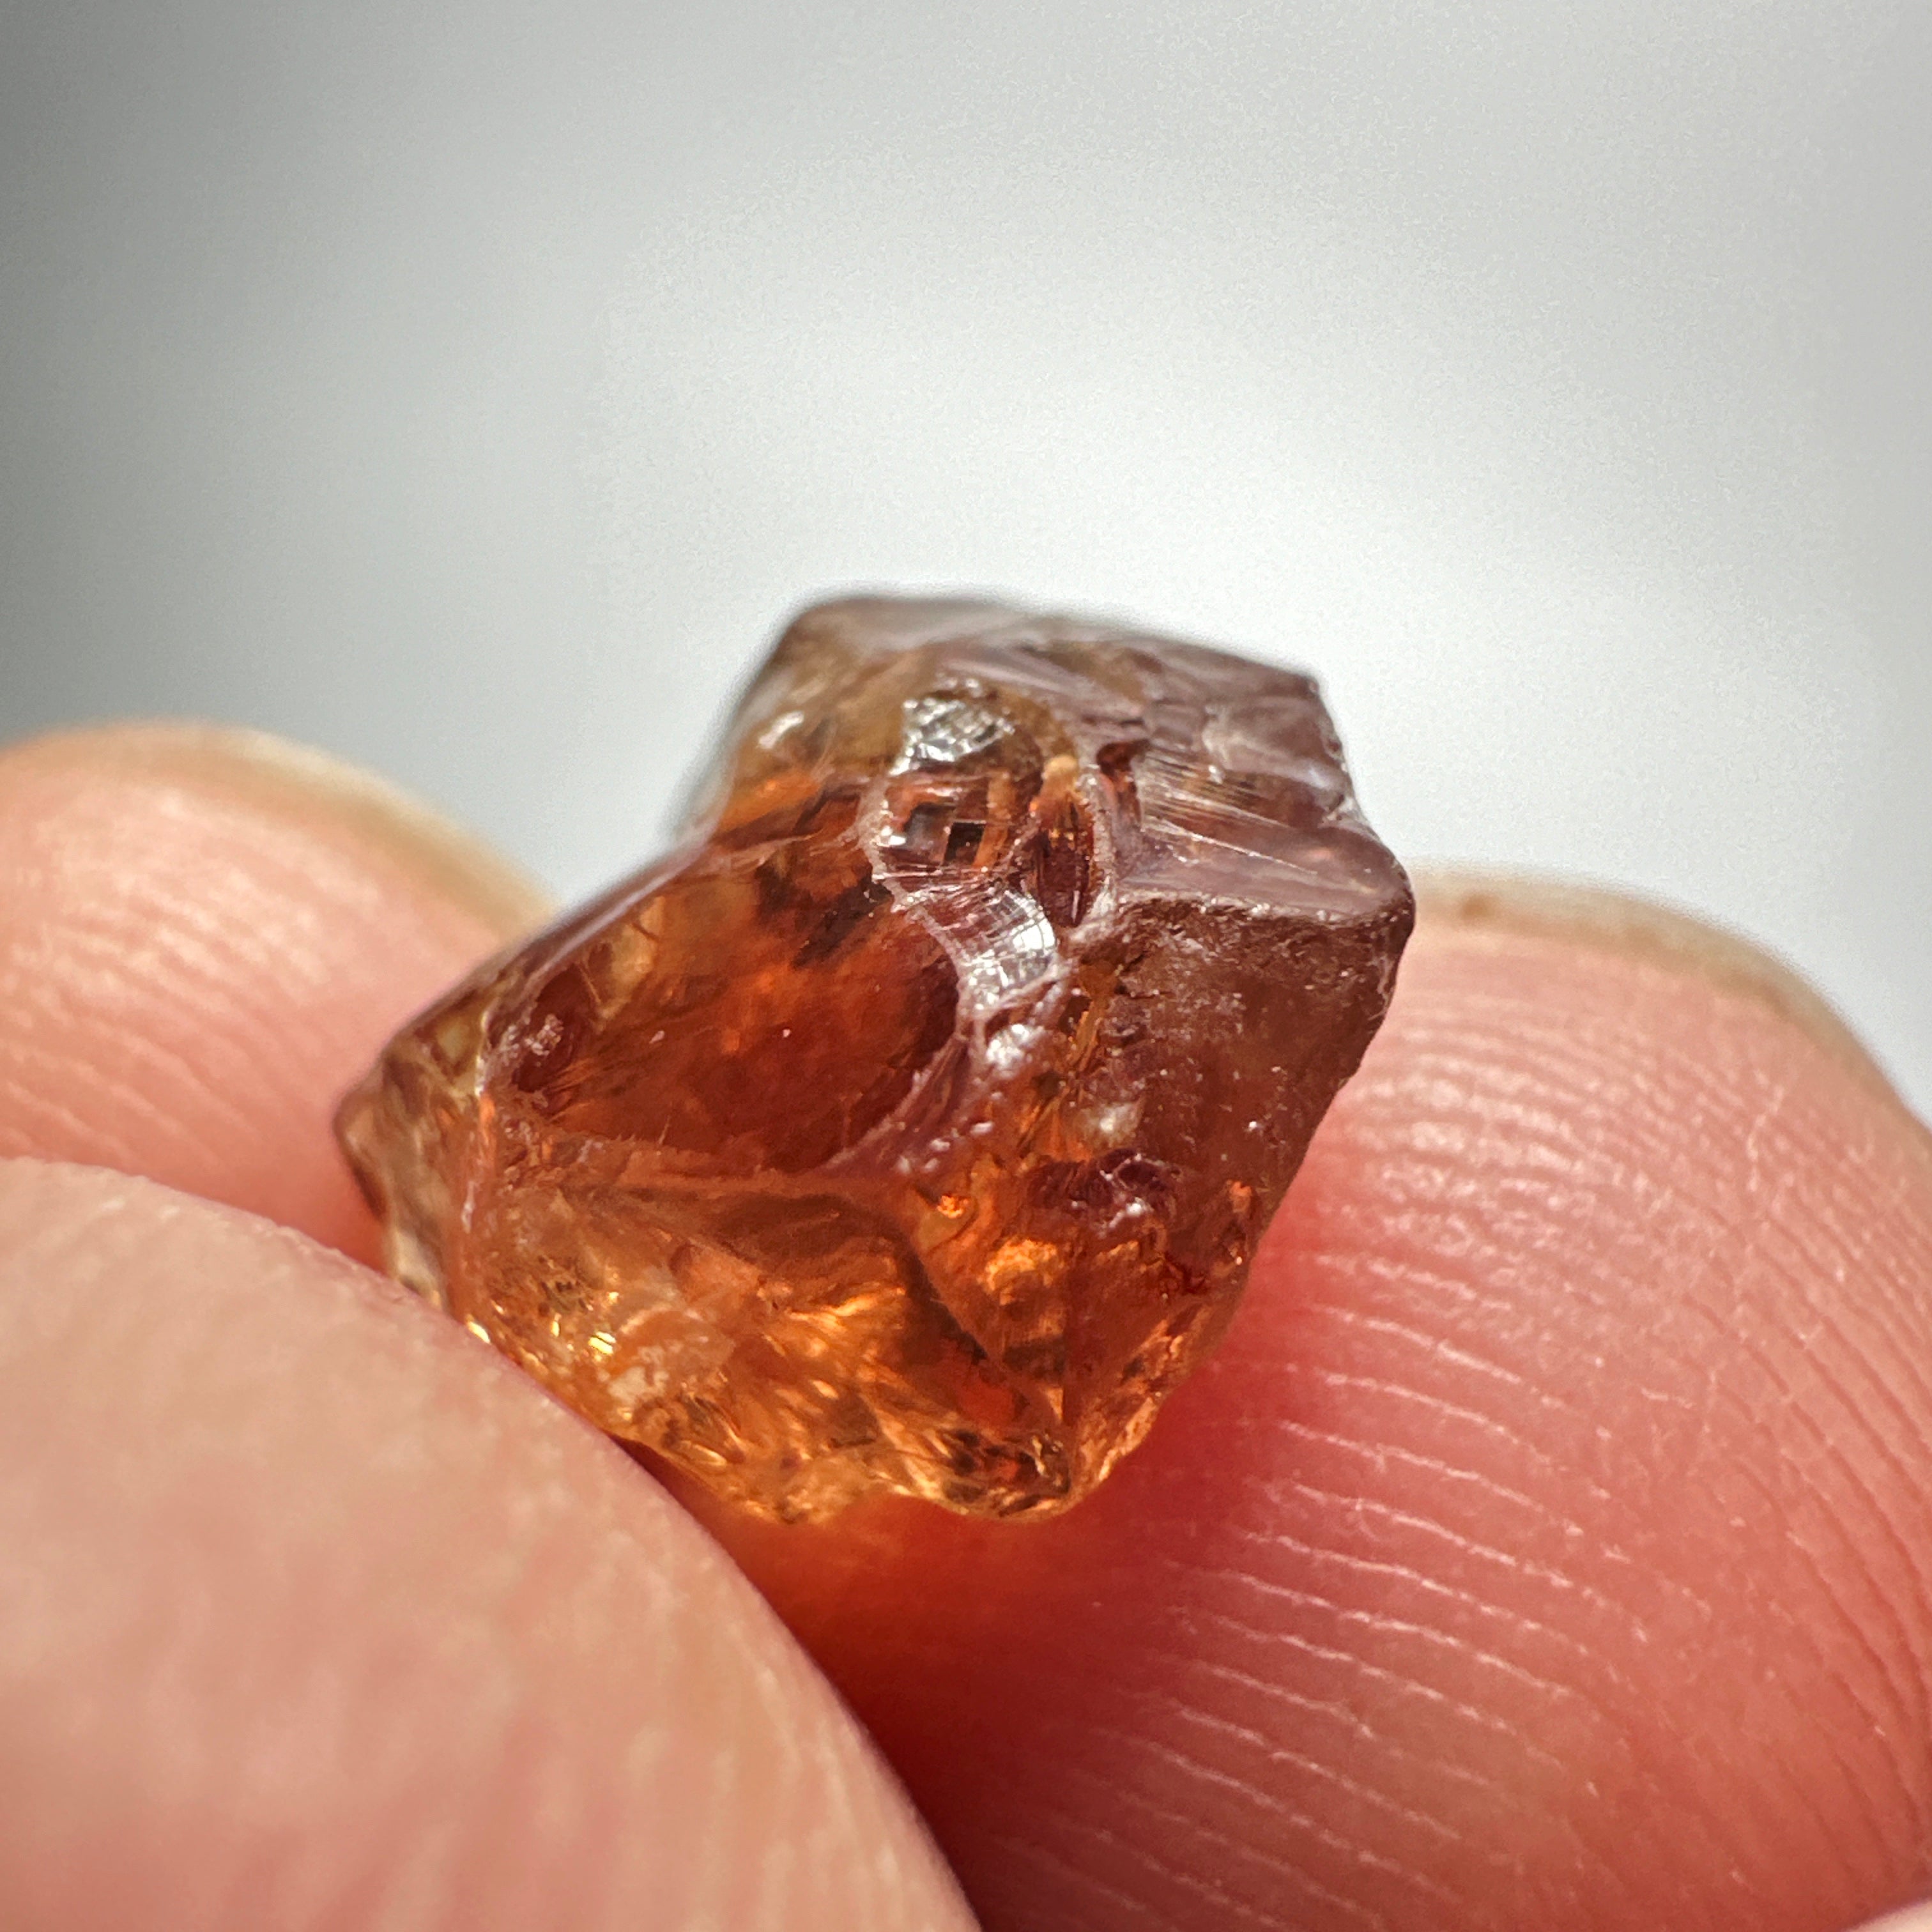 5.95ct Colour Change Garnet, Tanzania, Untreated Unheated, silky with slight inclusions on the outside, flat shape